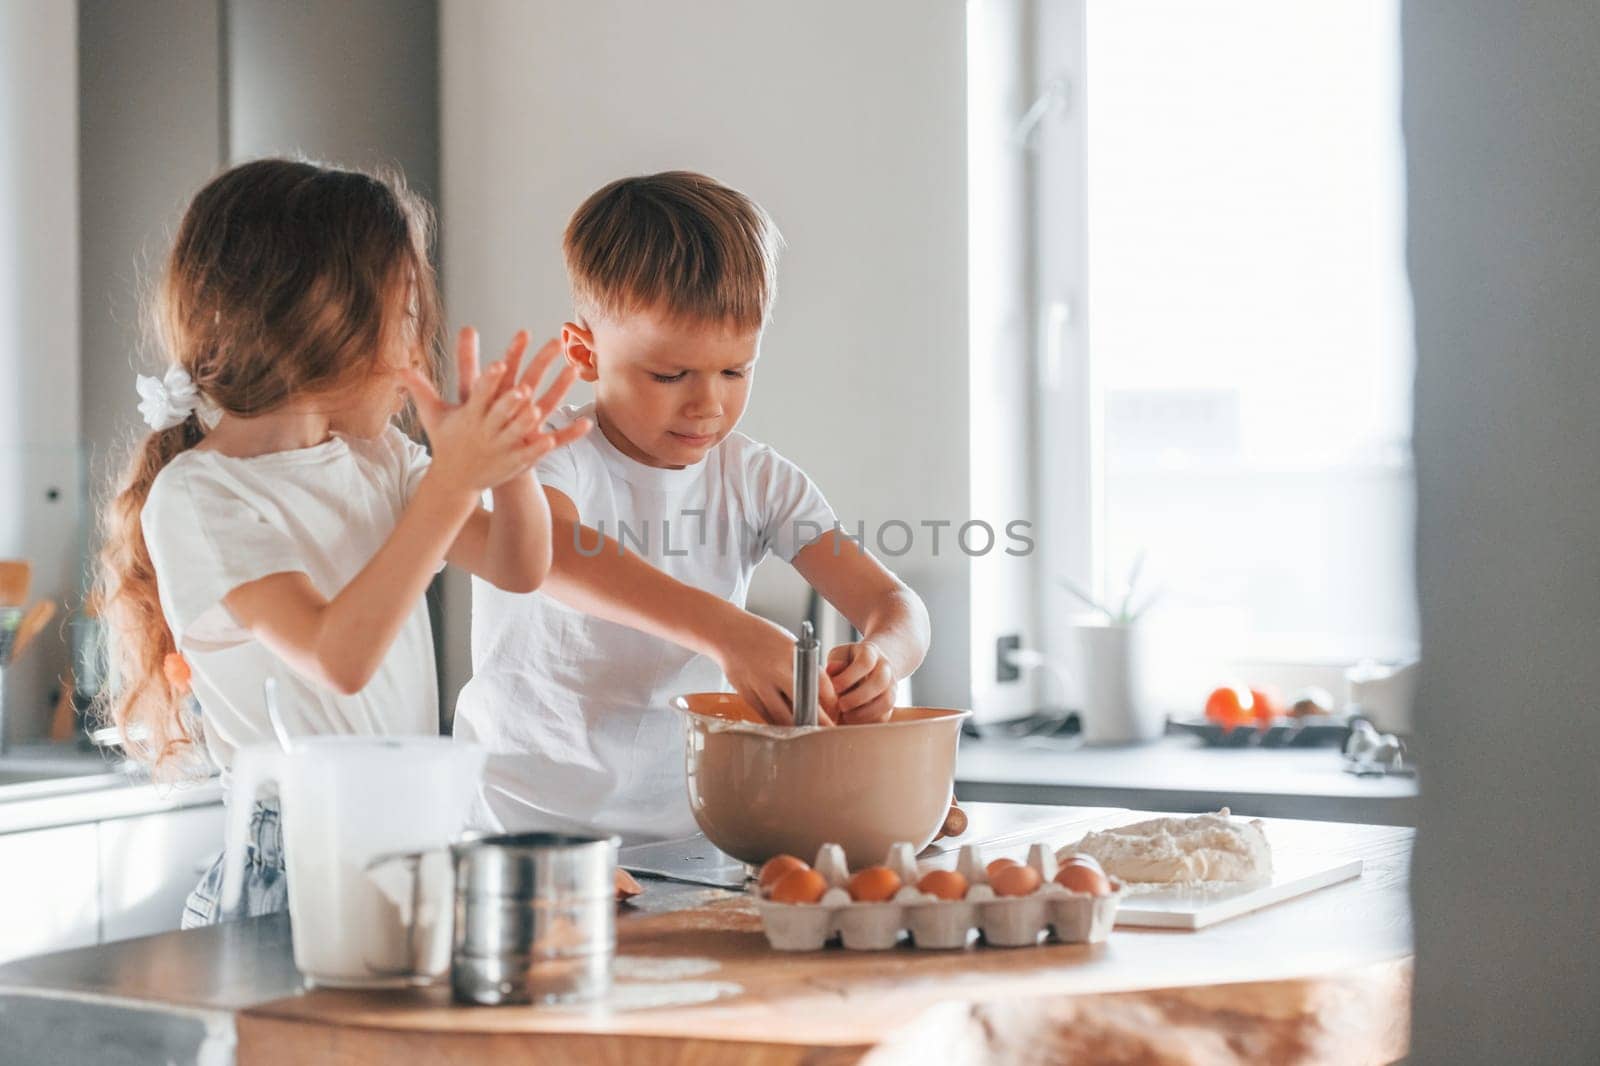 At daytime. Little boy and girl preparing Christmas cookies on the kitchen by Standret